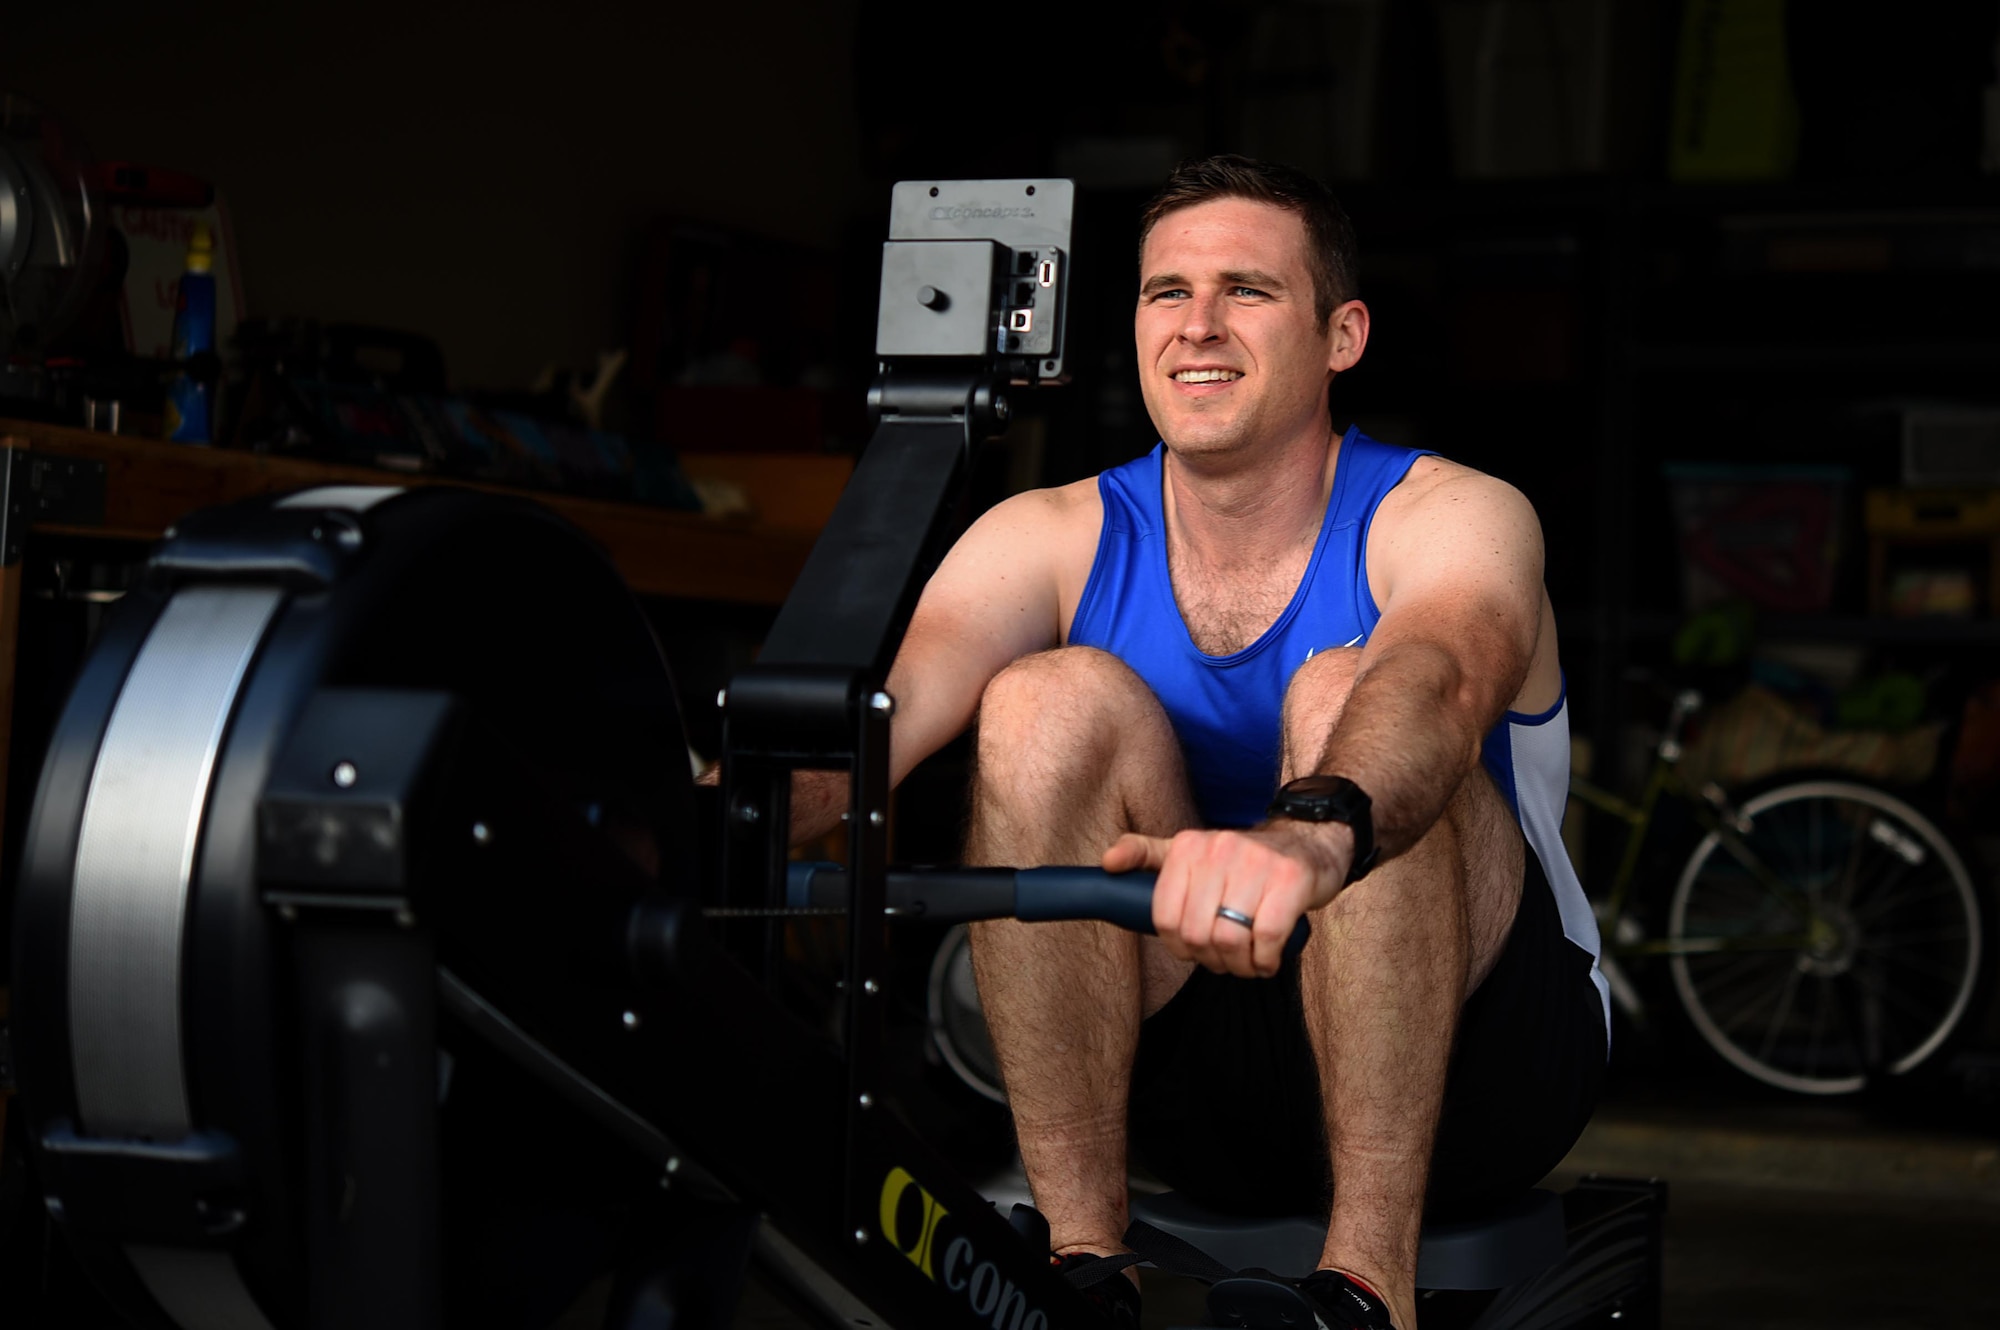 Capt. Hunter Barnhill, 37th Flying Training Squadron instructor pilot, completes a rep on his rowing machine May 15, 2018, on Columbus Air Force Base, Mississippi. Barnhill was diagnosed with brain cancer in 2017, and has since become one of the many resilient Airmen and participants in the Air Force Wounded Warrior community. (U.S. Air Force photo by Airman 1st Class Keith Holcomb)